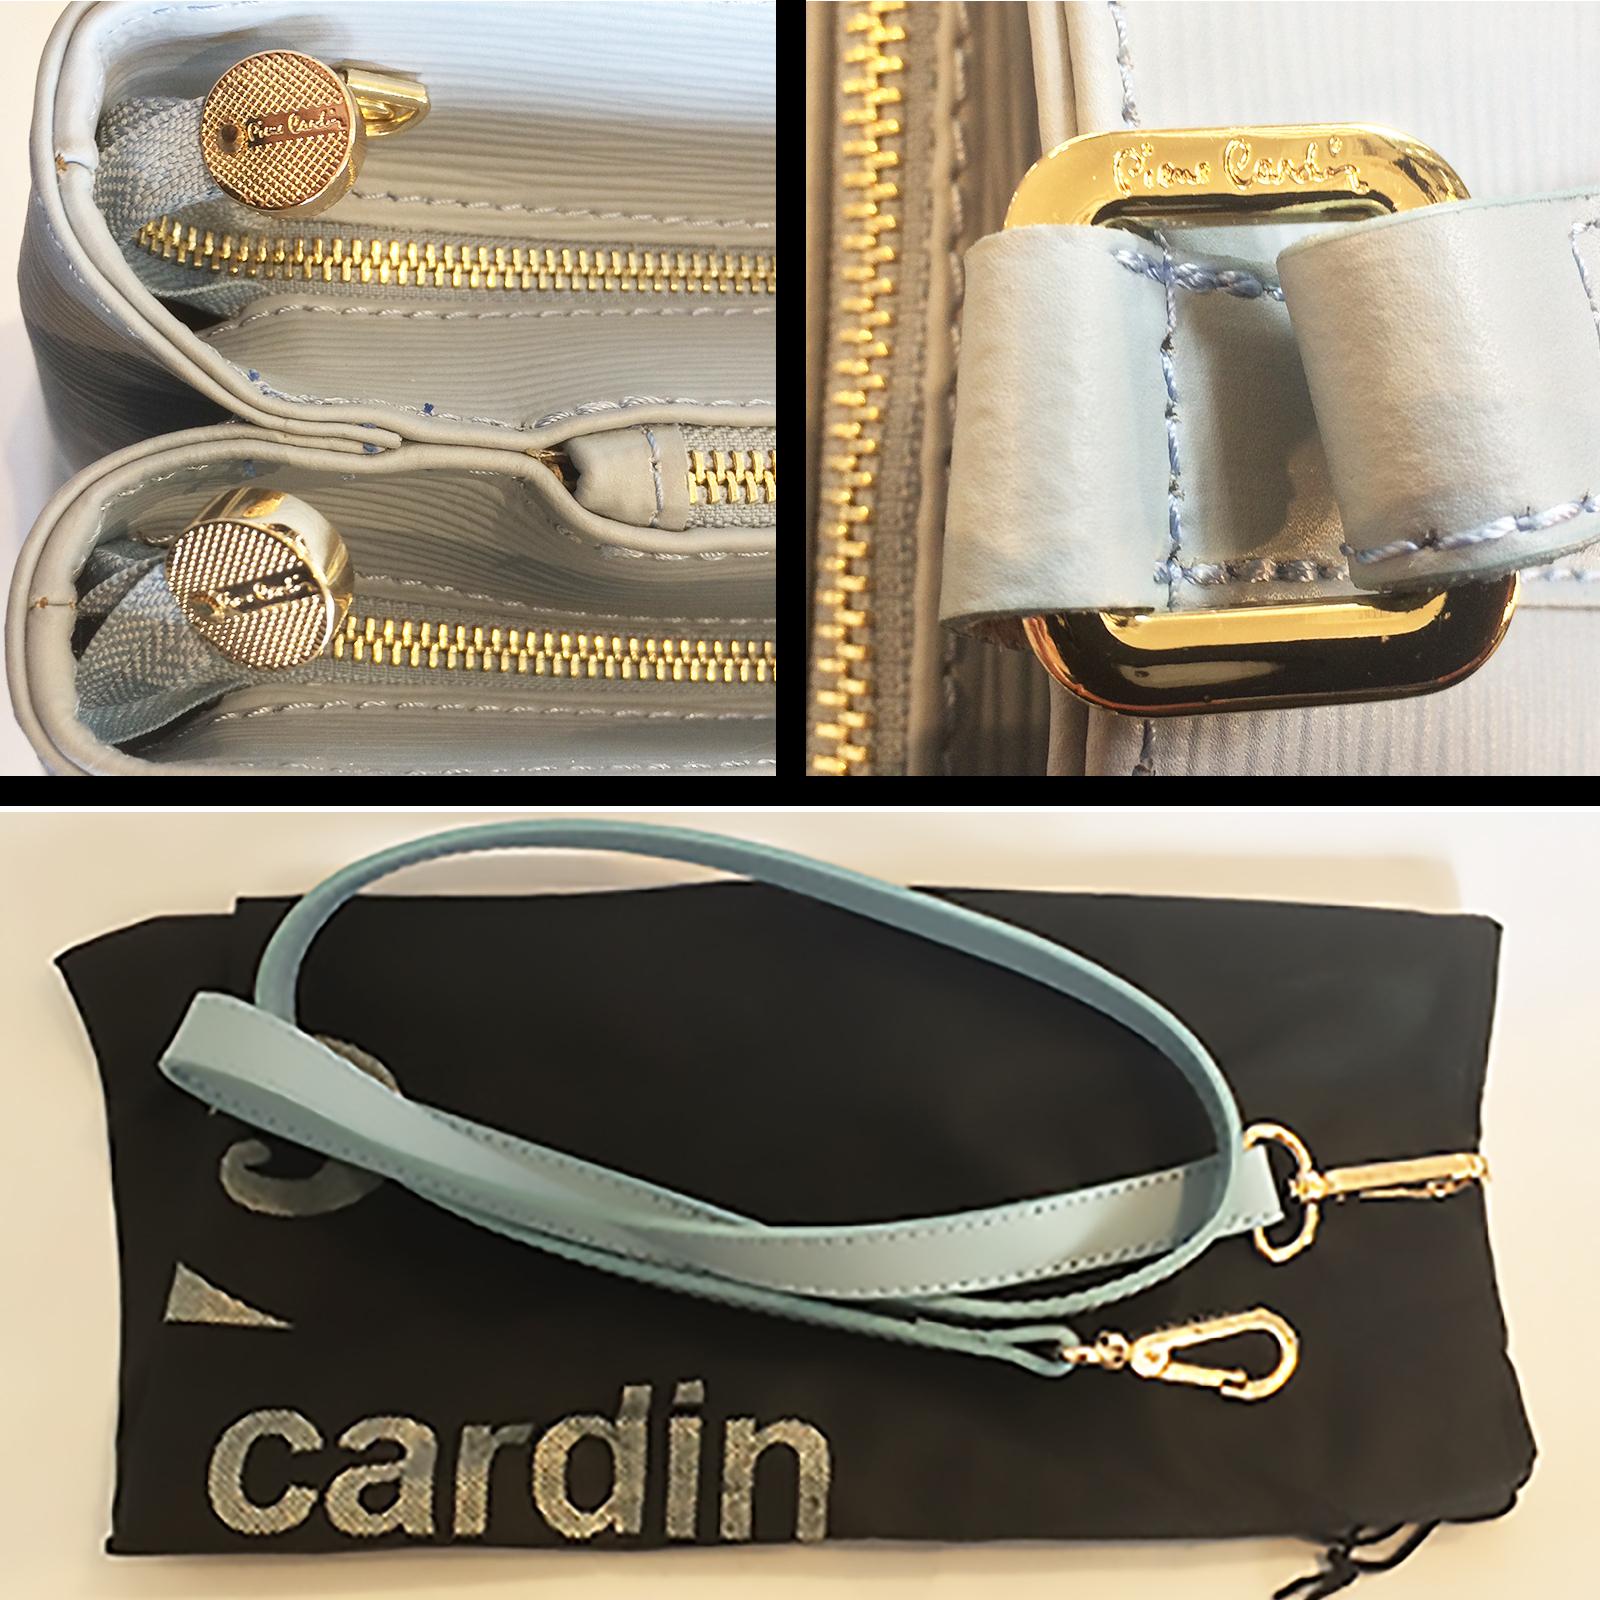 Pierre Cardin New Old Stock Handbag in Powder Blue Leather. Never been used, still with the untouched Dust bag, separate shoulder strap, etc.. The Bag front is imprinted in script to the front, “Pierre Cardin” and also to all metal components. There